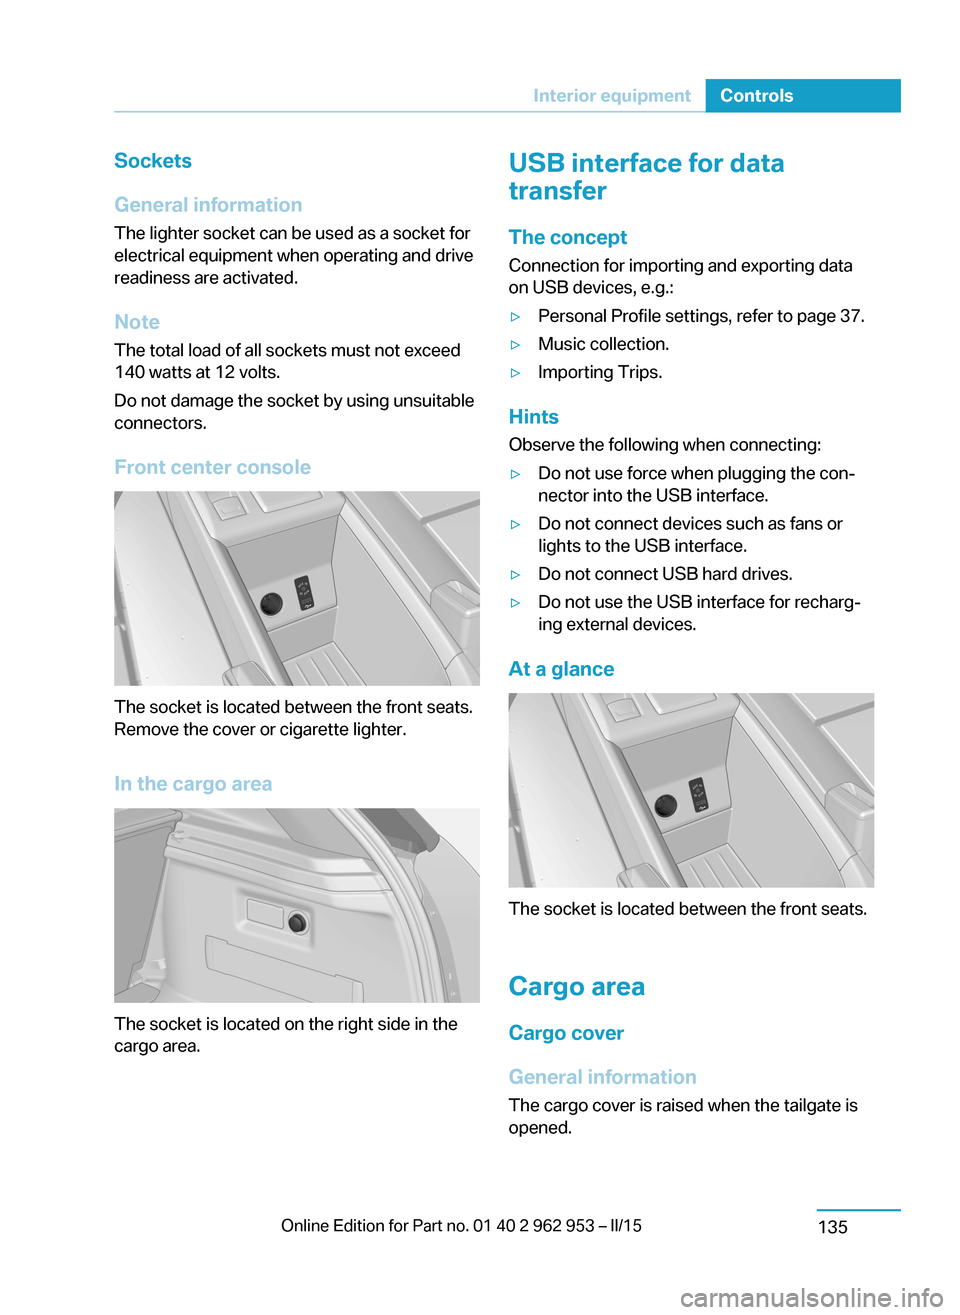 BMW I3 2014 I01 Owners Manual Sockets
General information
The lighter socket can be used as a socket for
electrical equipment when operating and drive
readiness are activated.
Note
The total load of all sockets must not exceed
140